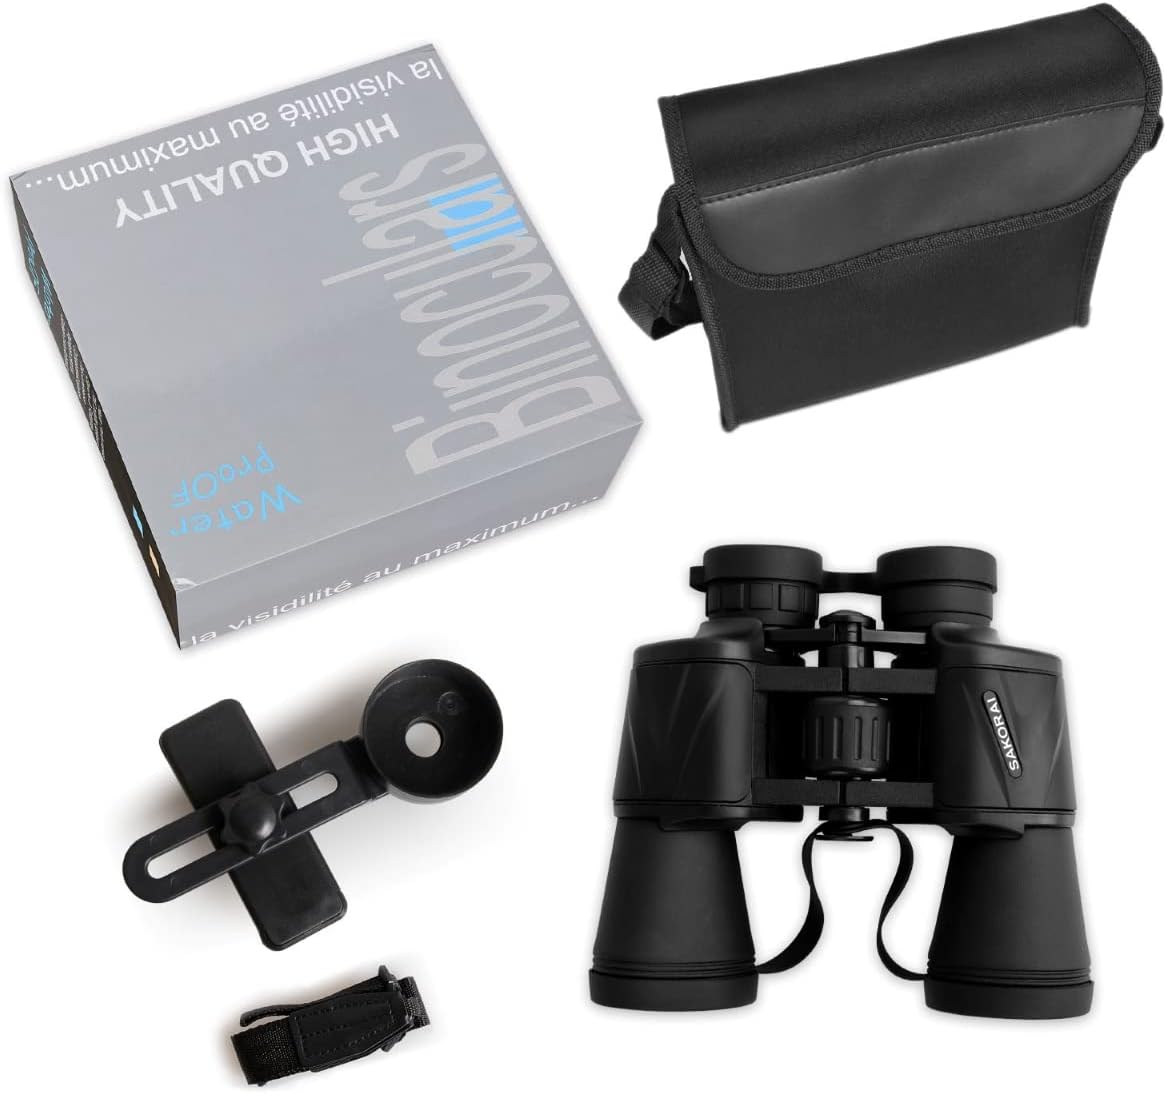 20x50 Binoculars for Adults, HD Professional Roof Prism Binoculars for Bird Watching Travel Stargazing Hunting Sports-BAK4 Prism FMC Lens-with Phone Adapter Neck Strap Carrying Case (Black)